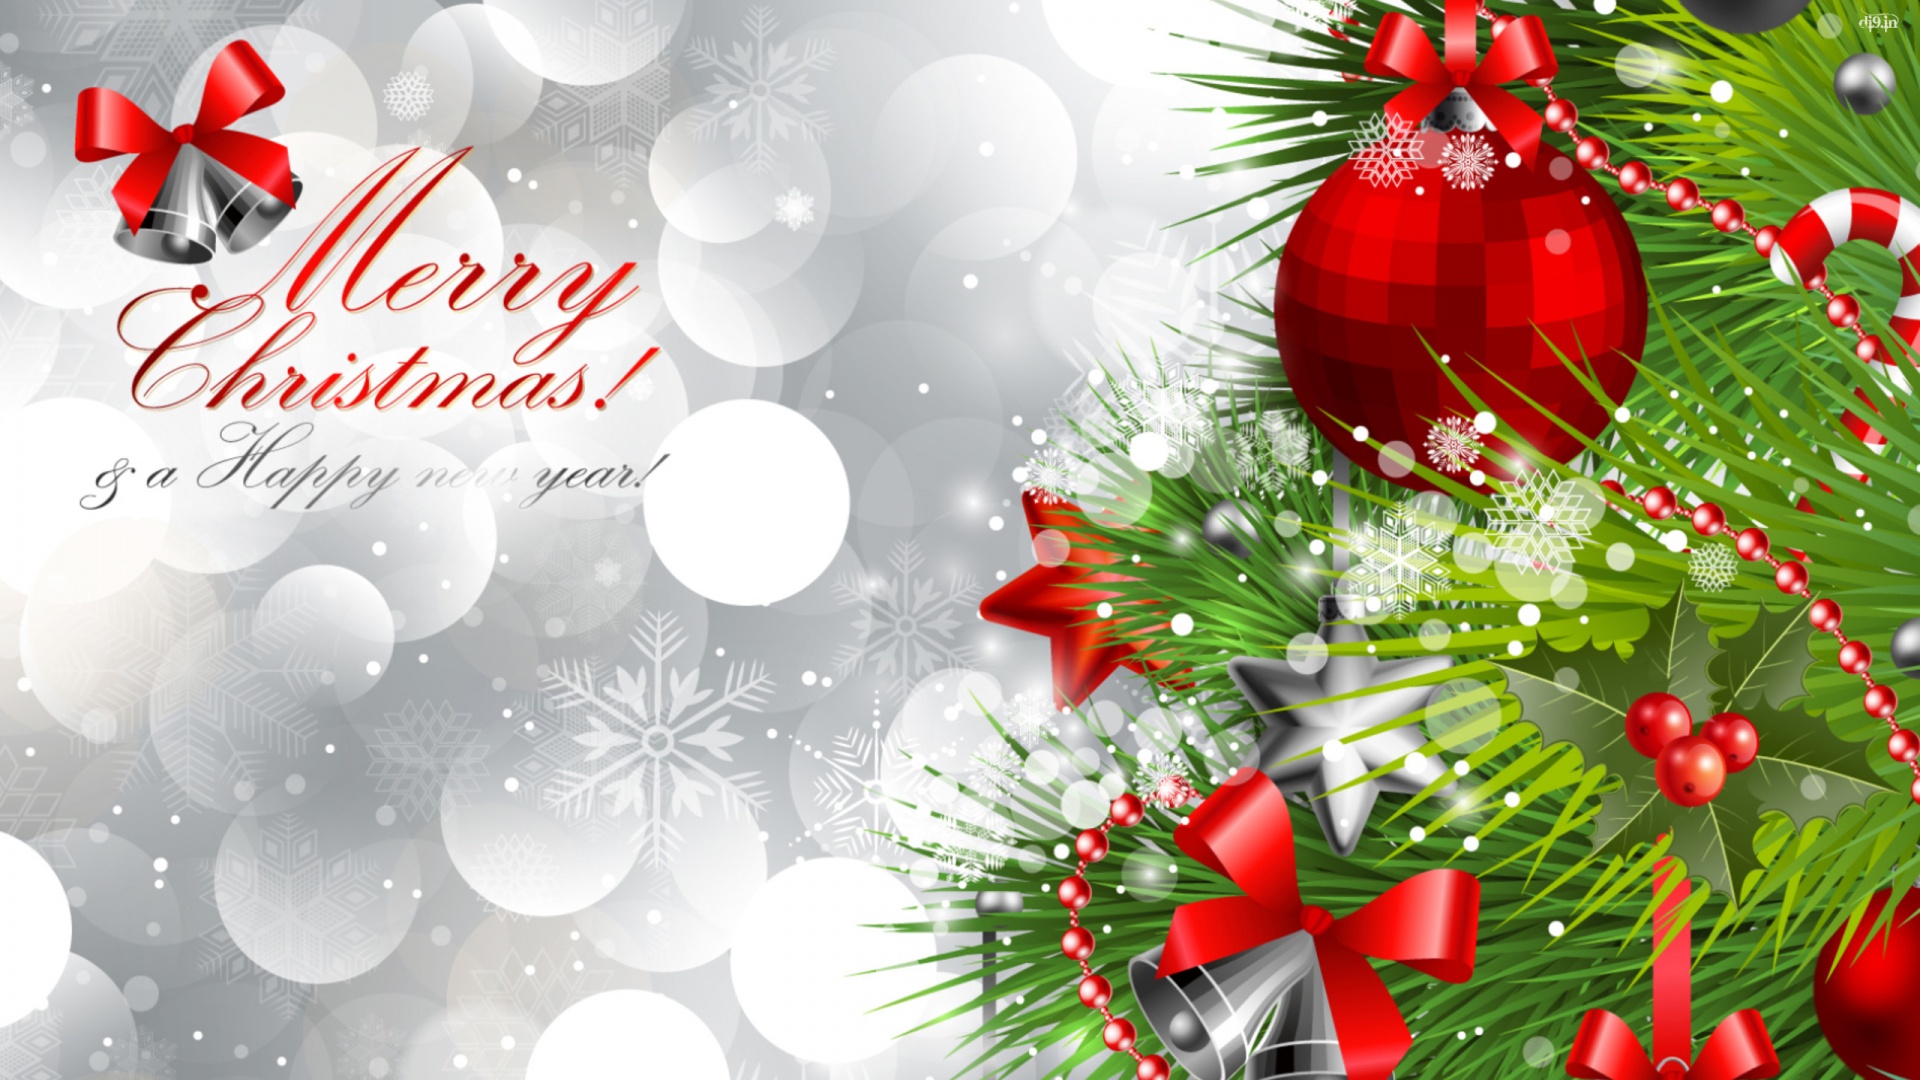 Merry Christmas and Happy New Year 2020 Wishes, Greetings